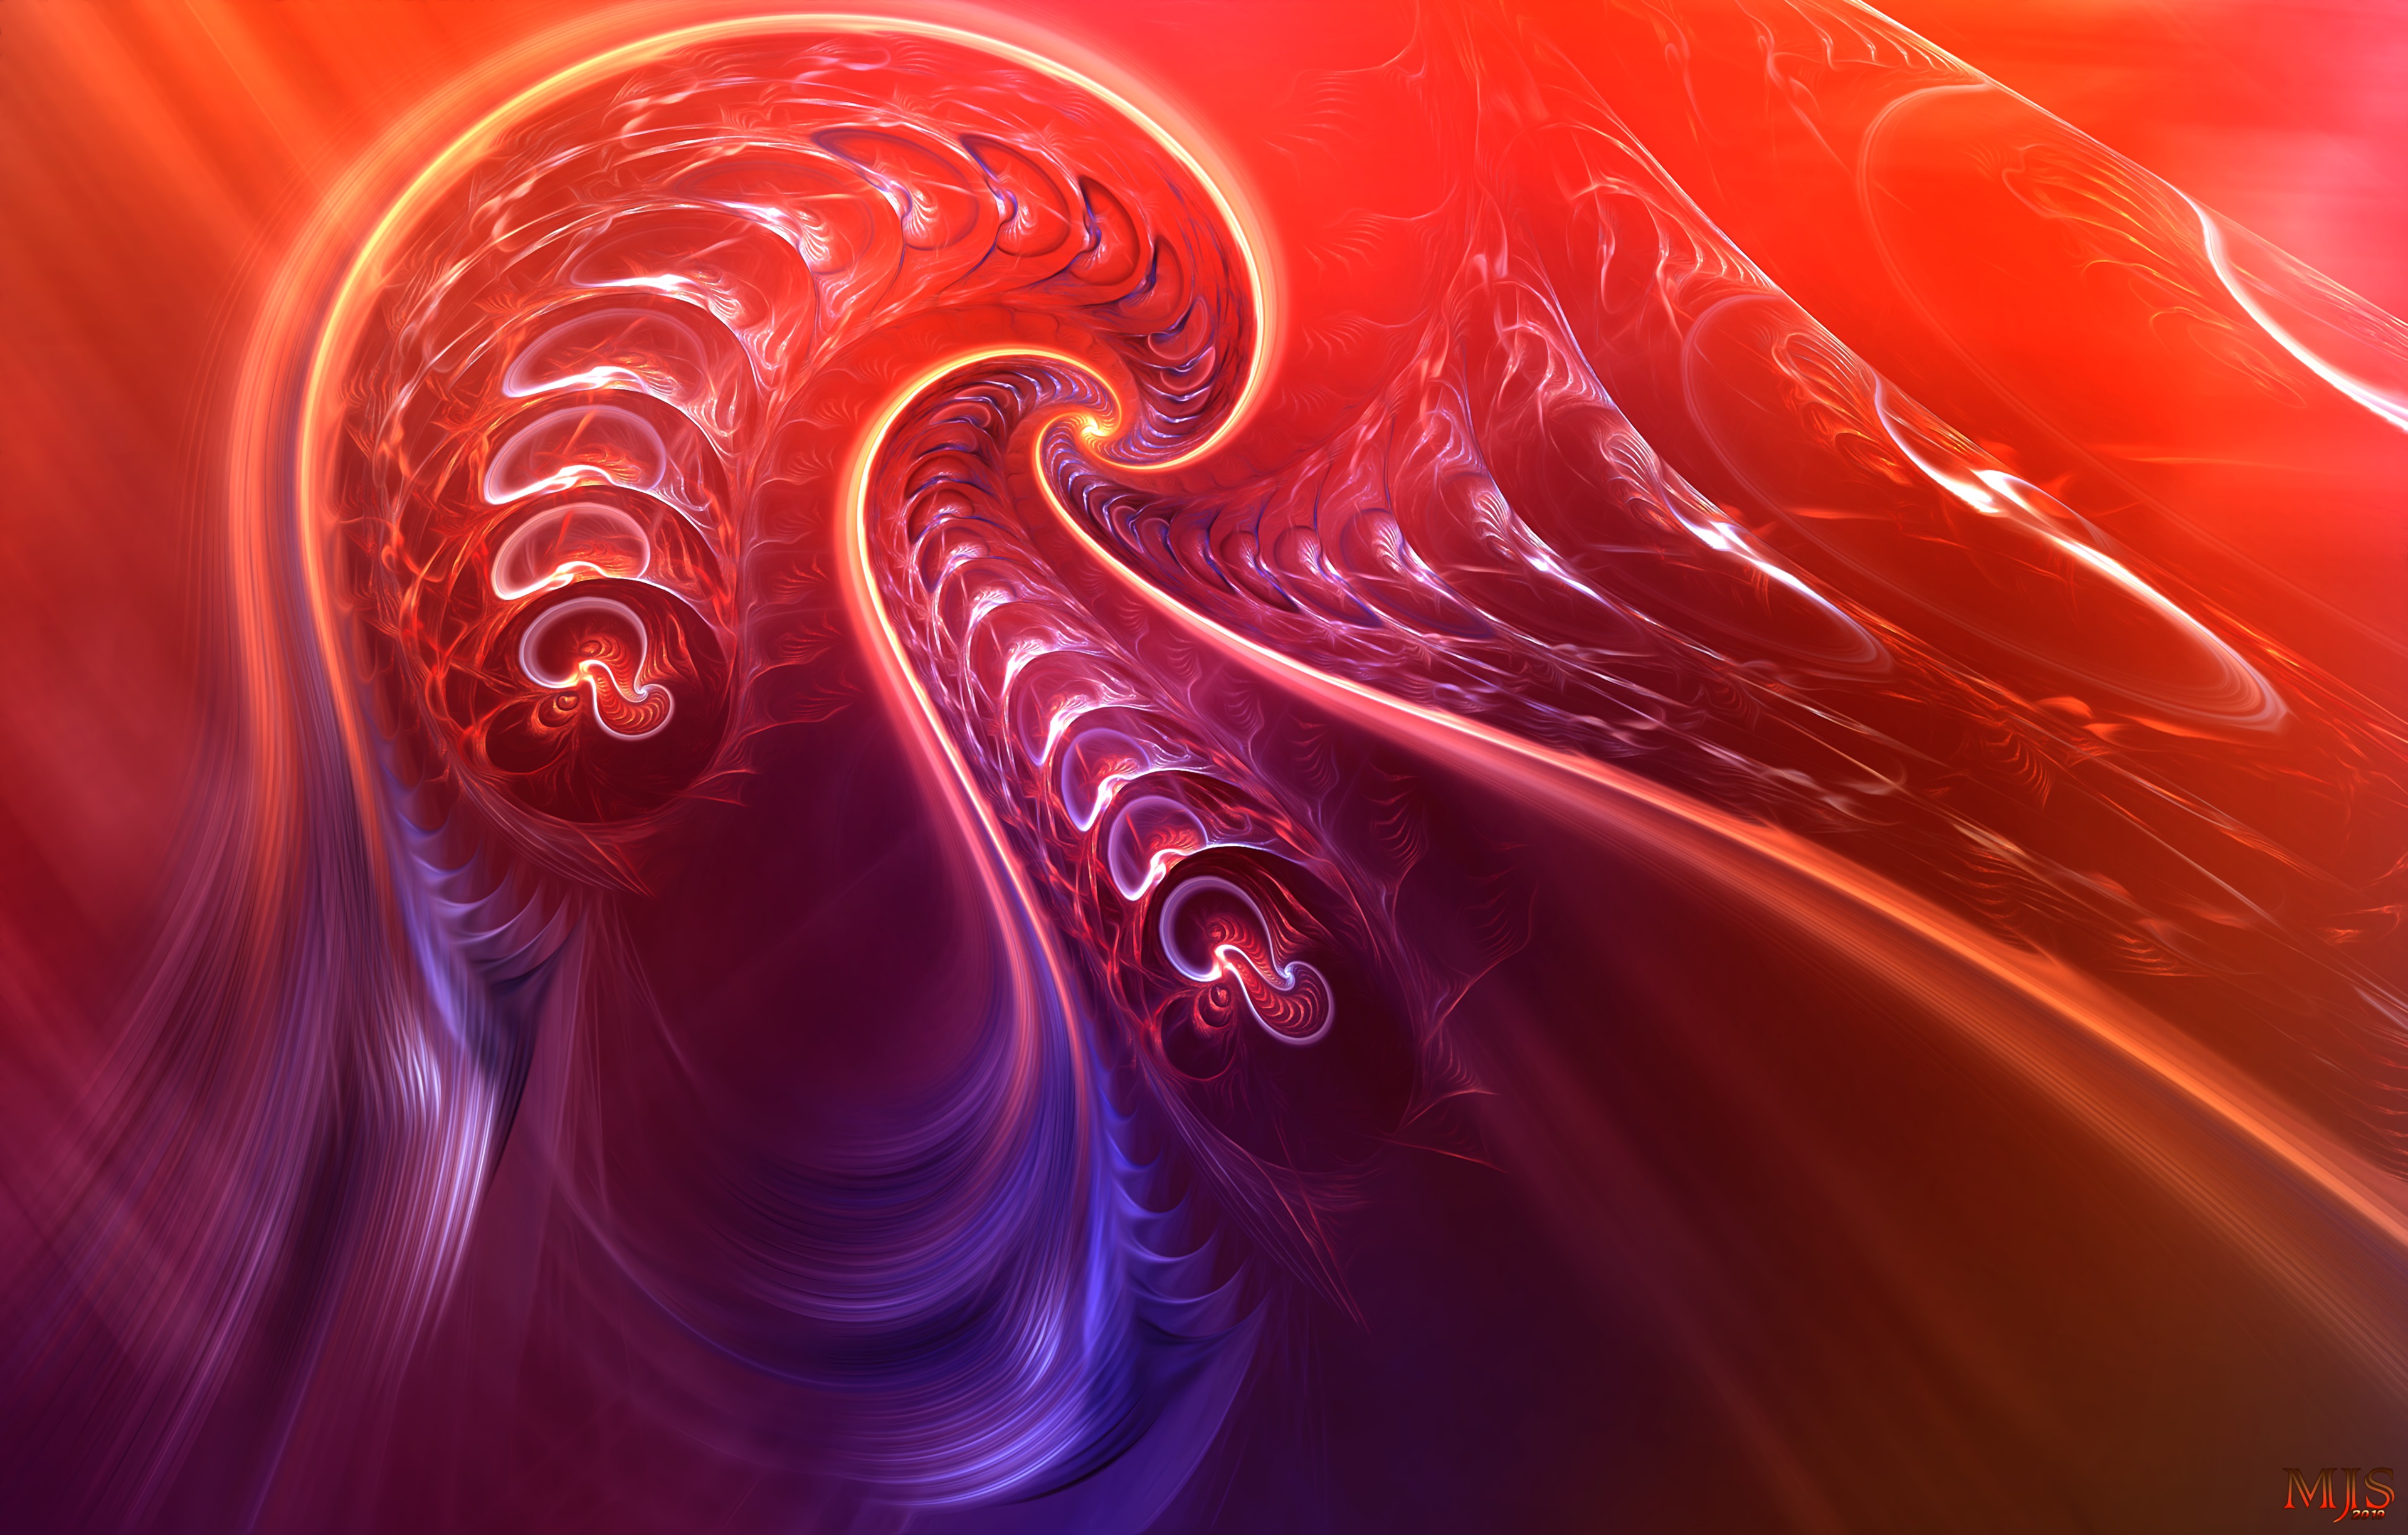 confused, abstract, bright, fractal, intricate, swirling, involute High Definition image